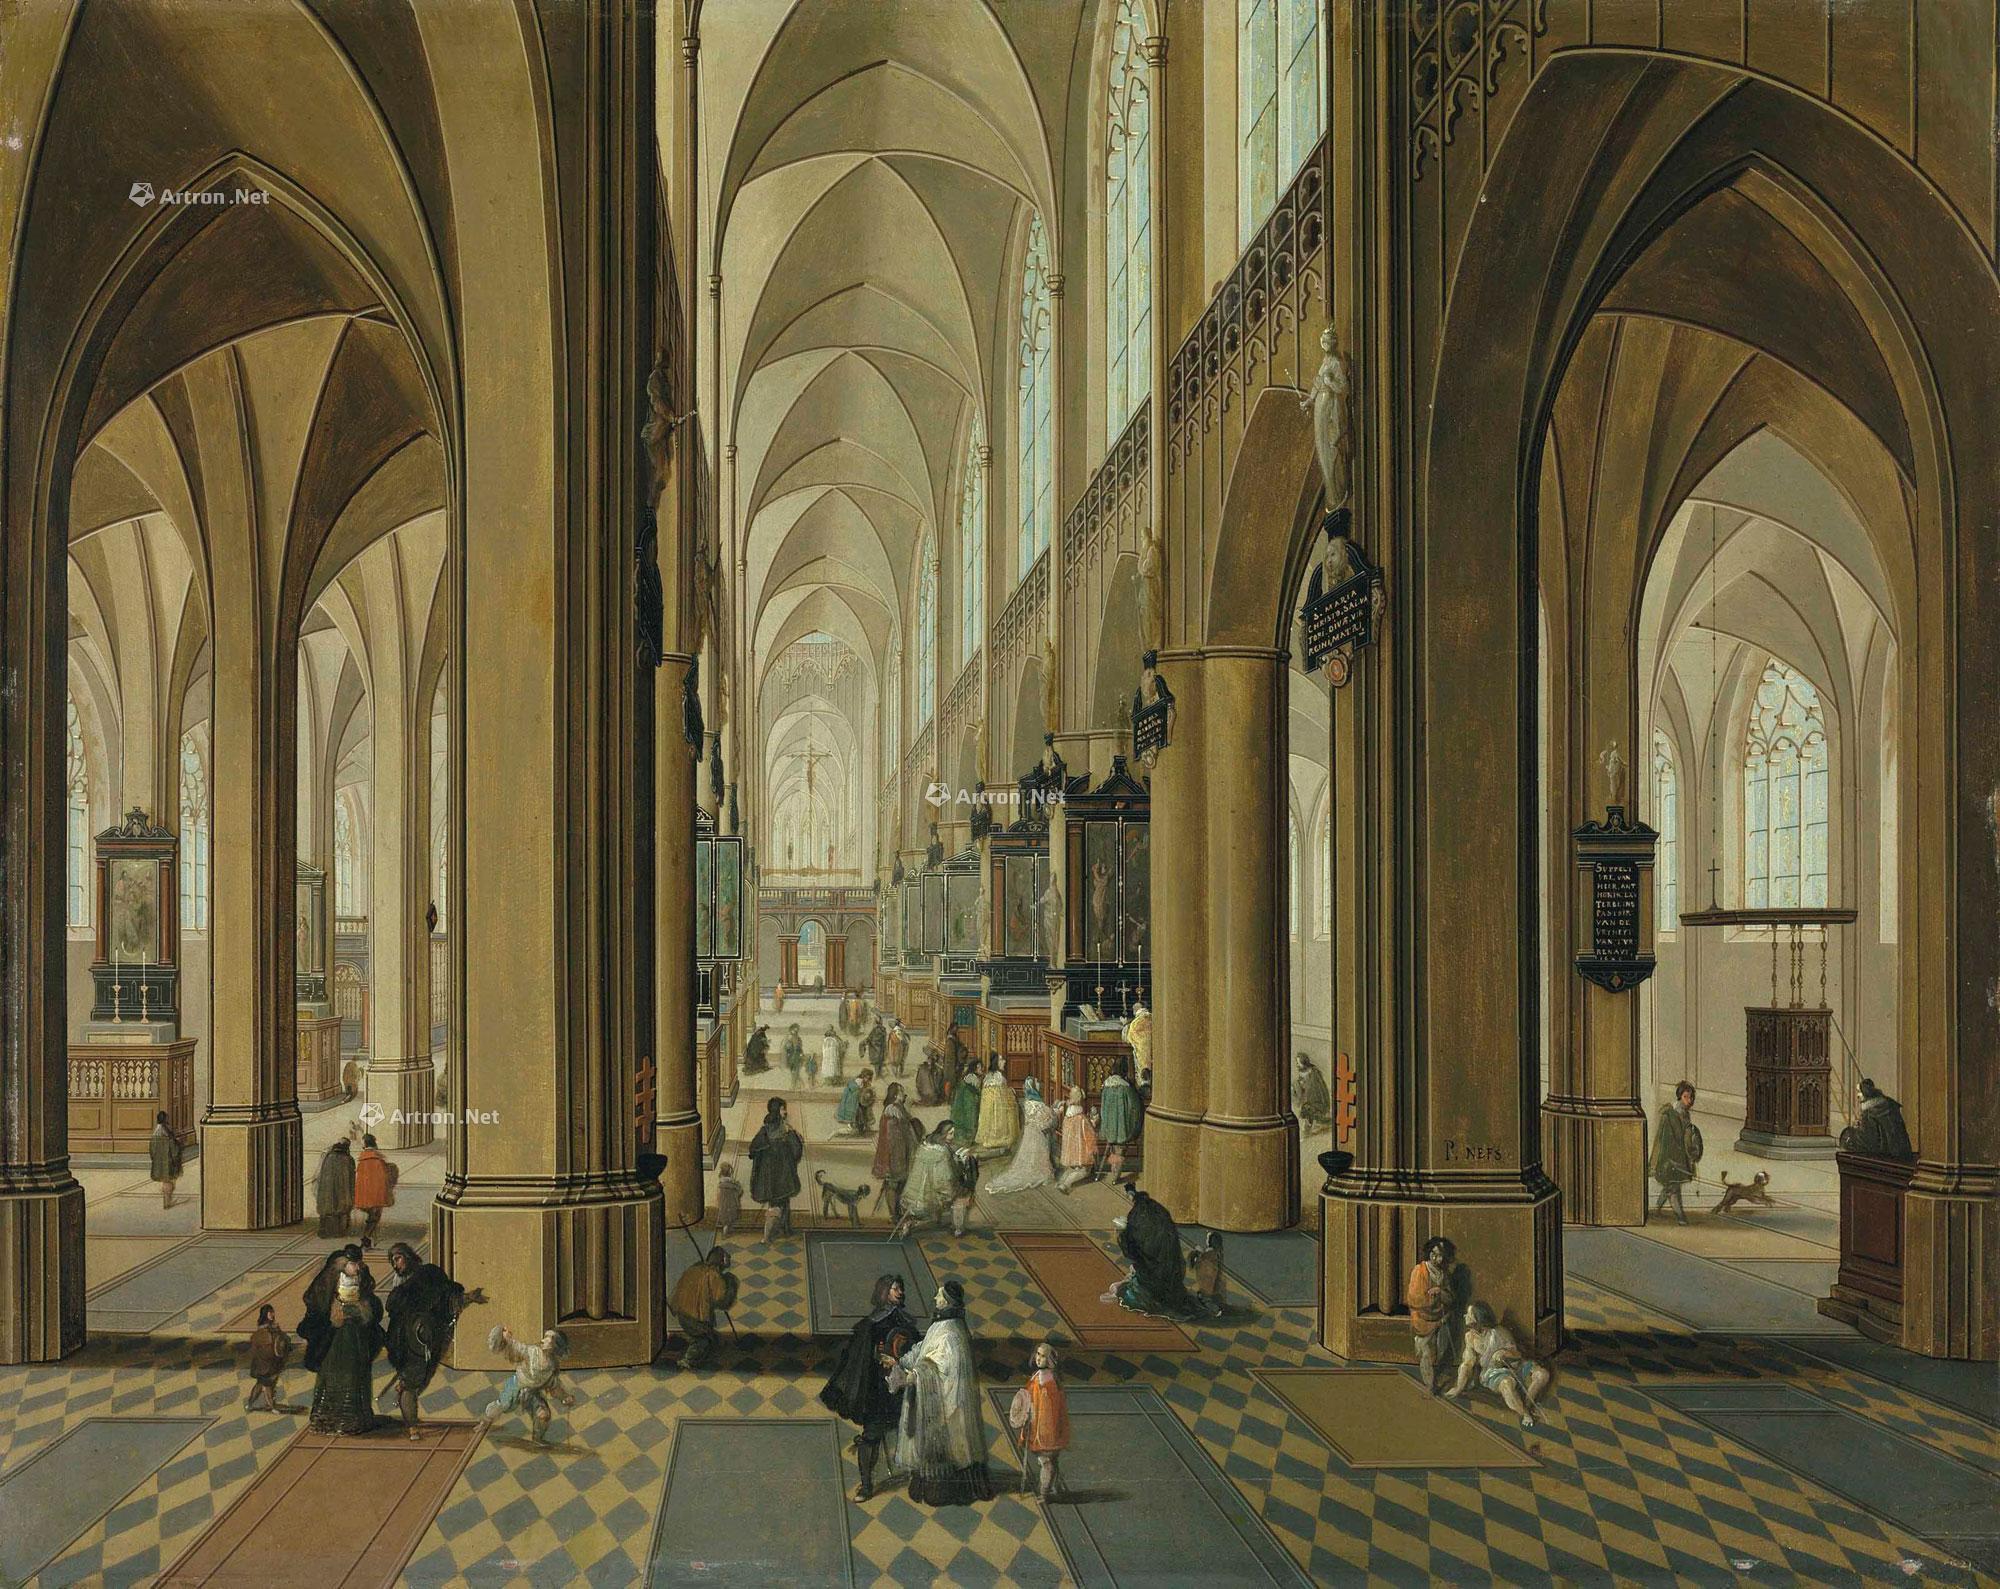 the interior of the cathedral of our lady,antwer